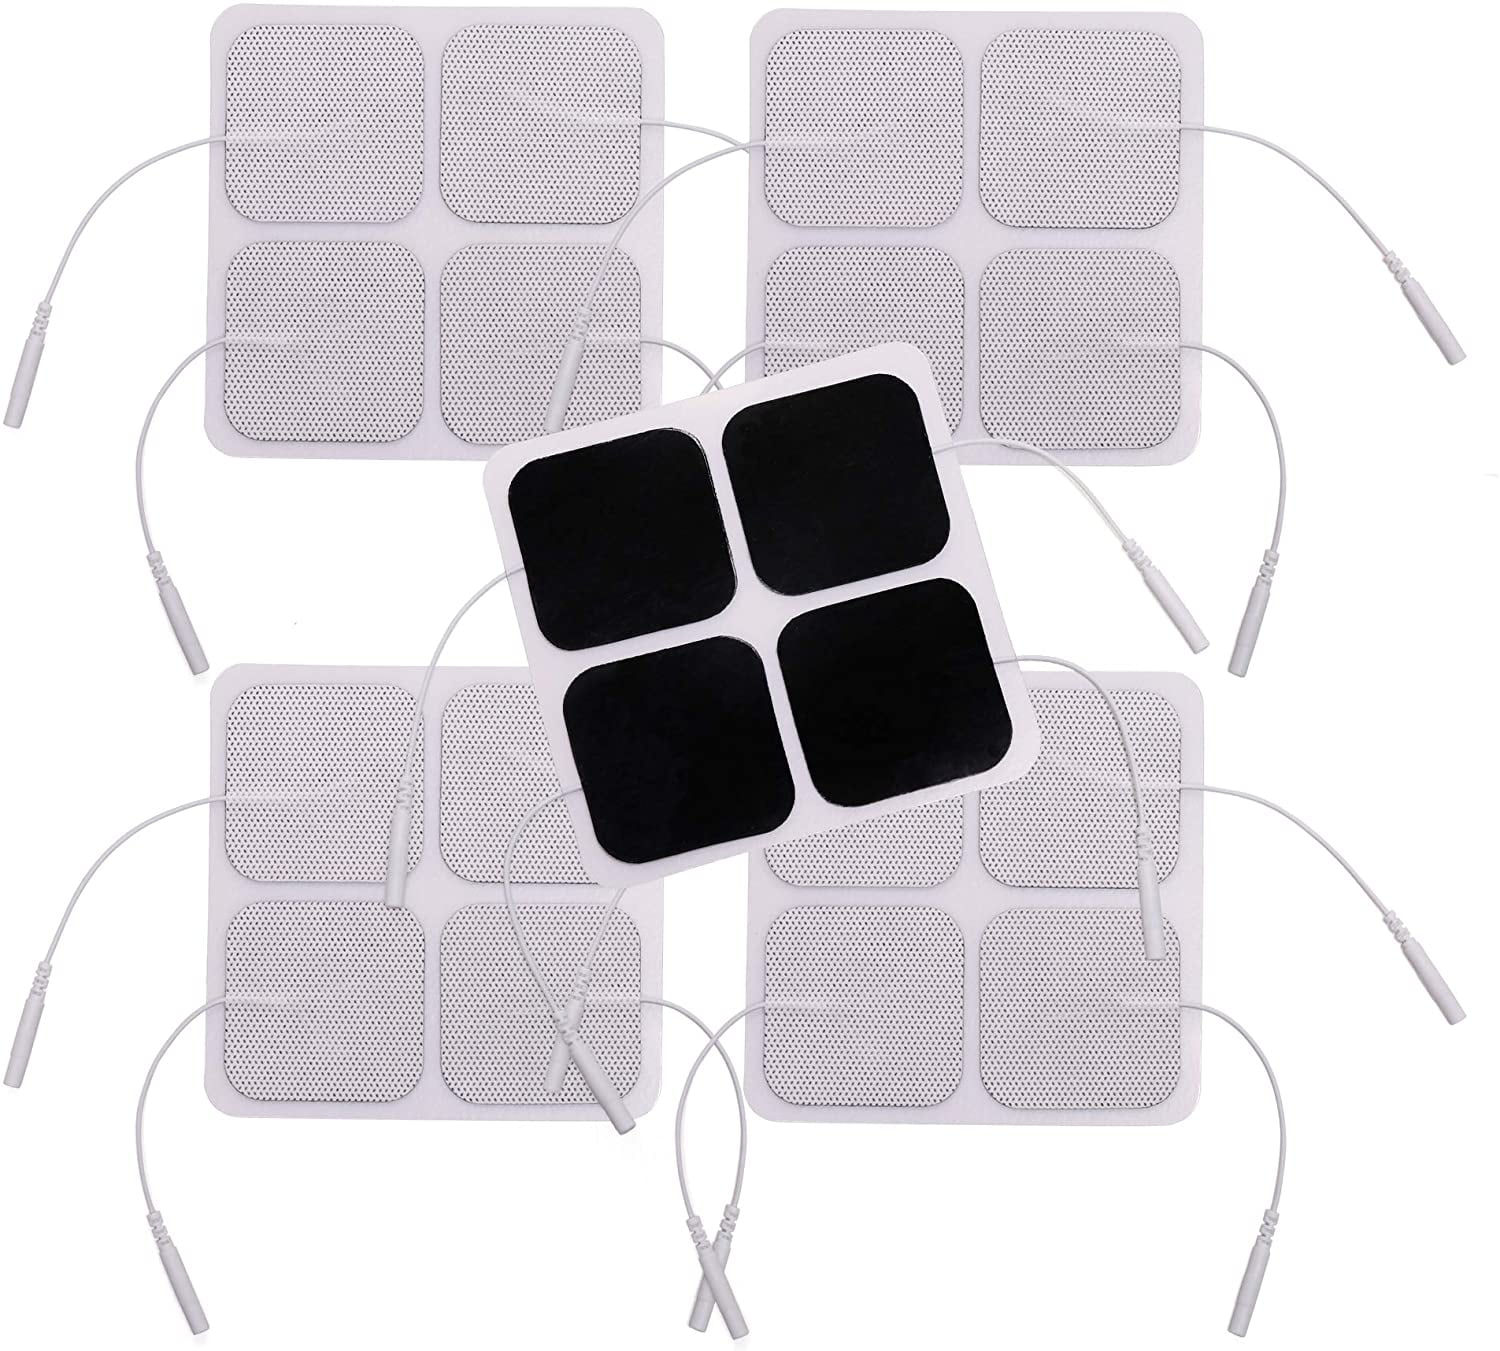 Self Adhesive Electrode Pads For TENS Unit Therapy Machine Set Of 2/4 Ems  Bioelectric Acupoints Massager For EMS Muscle Stimulation And Body Patch  Arm Replacement 230317 From Diao07, $8.93